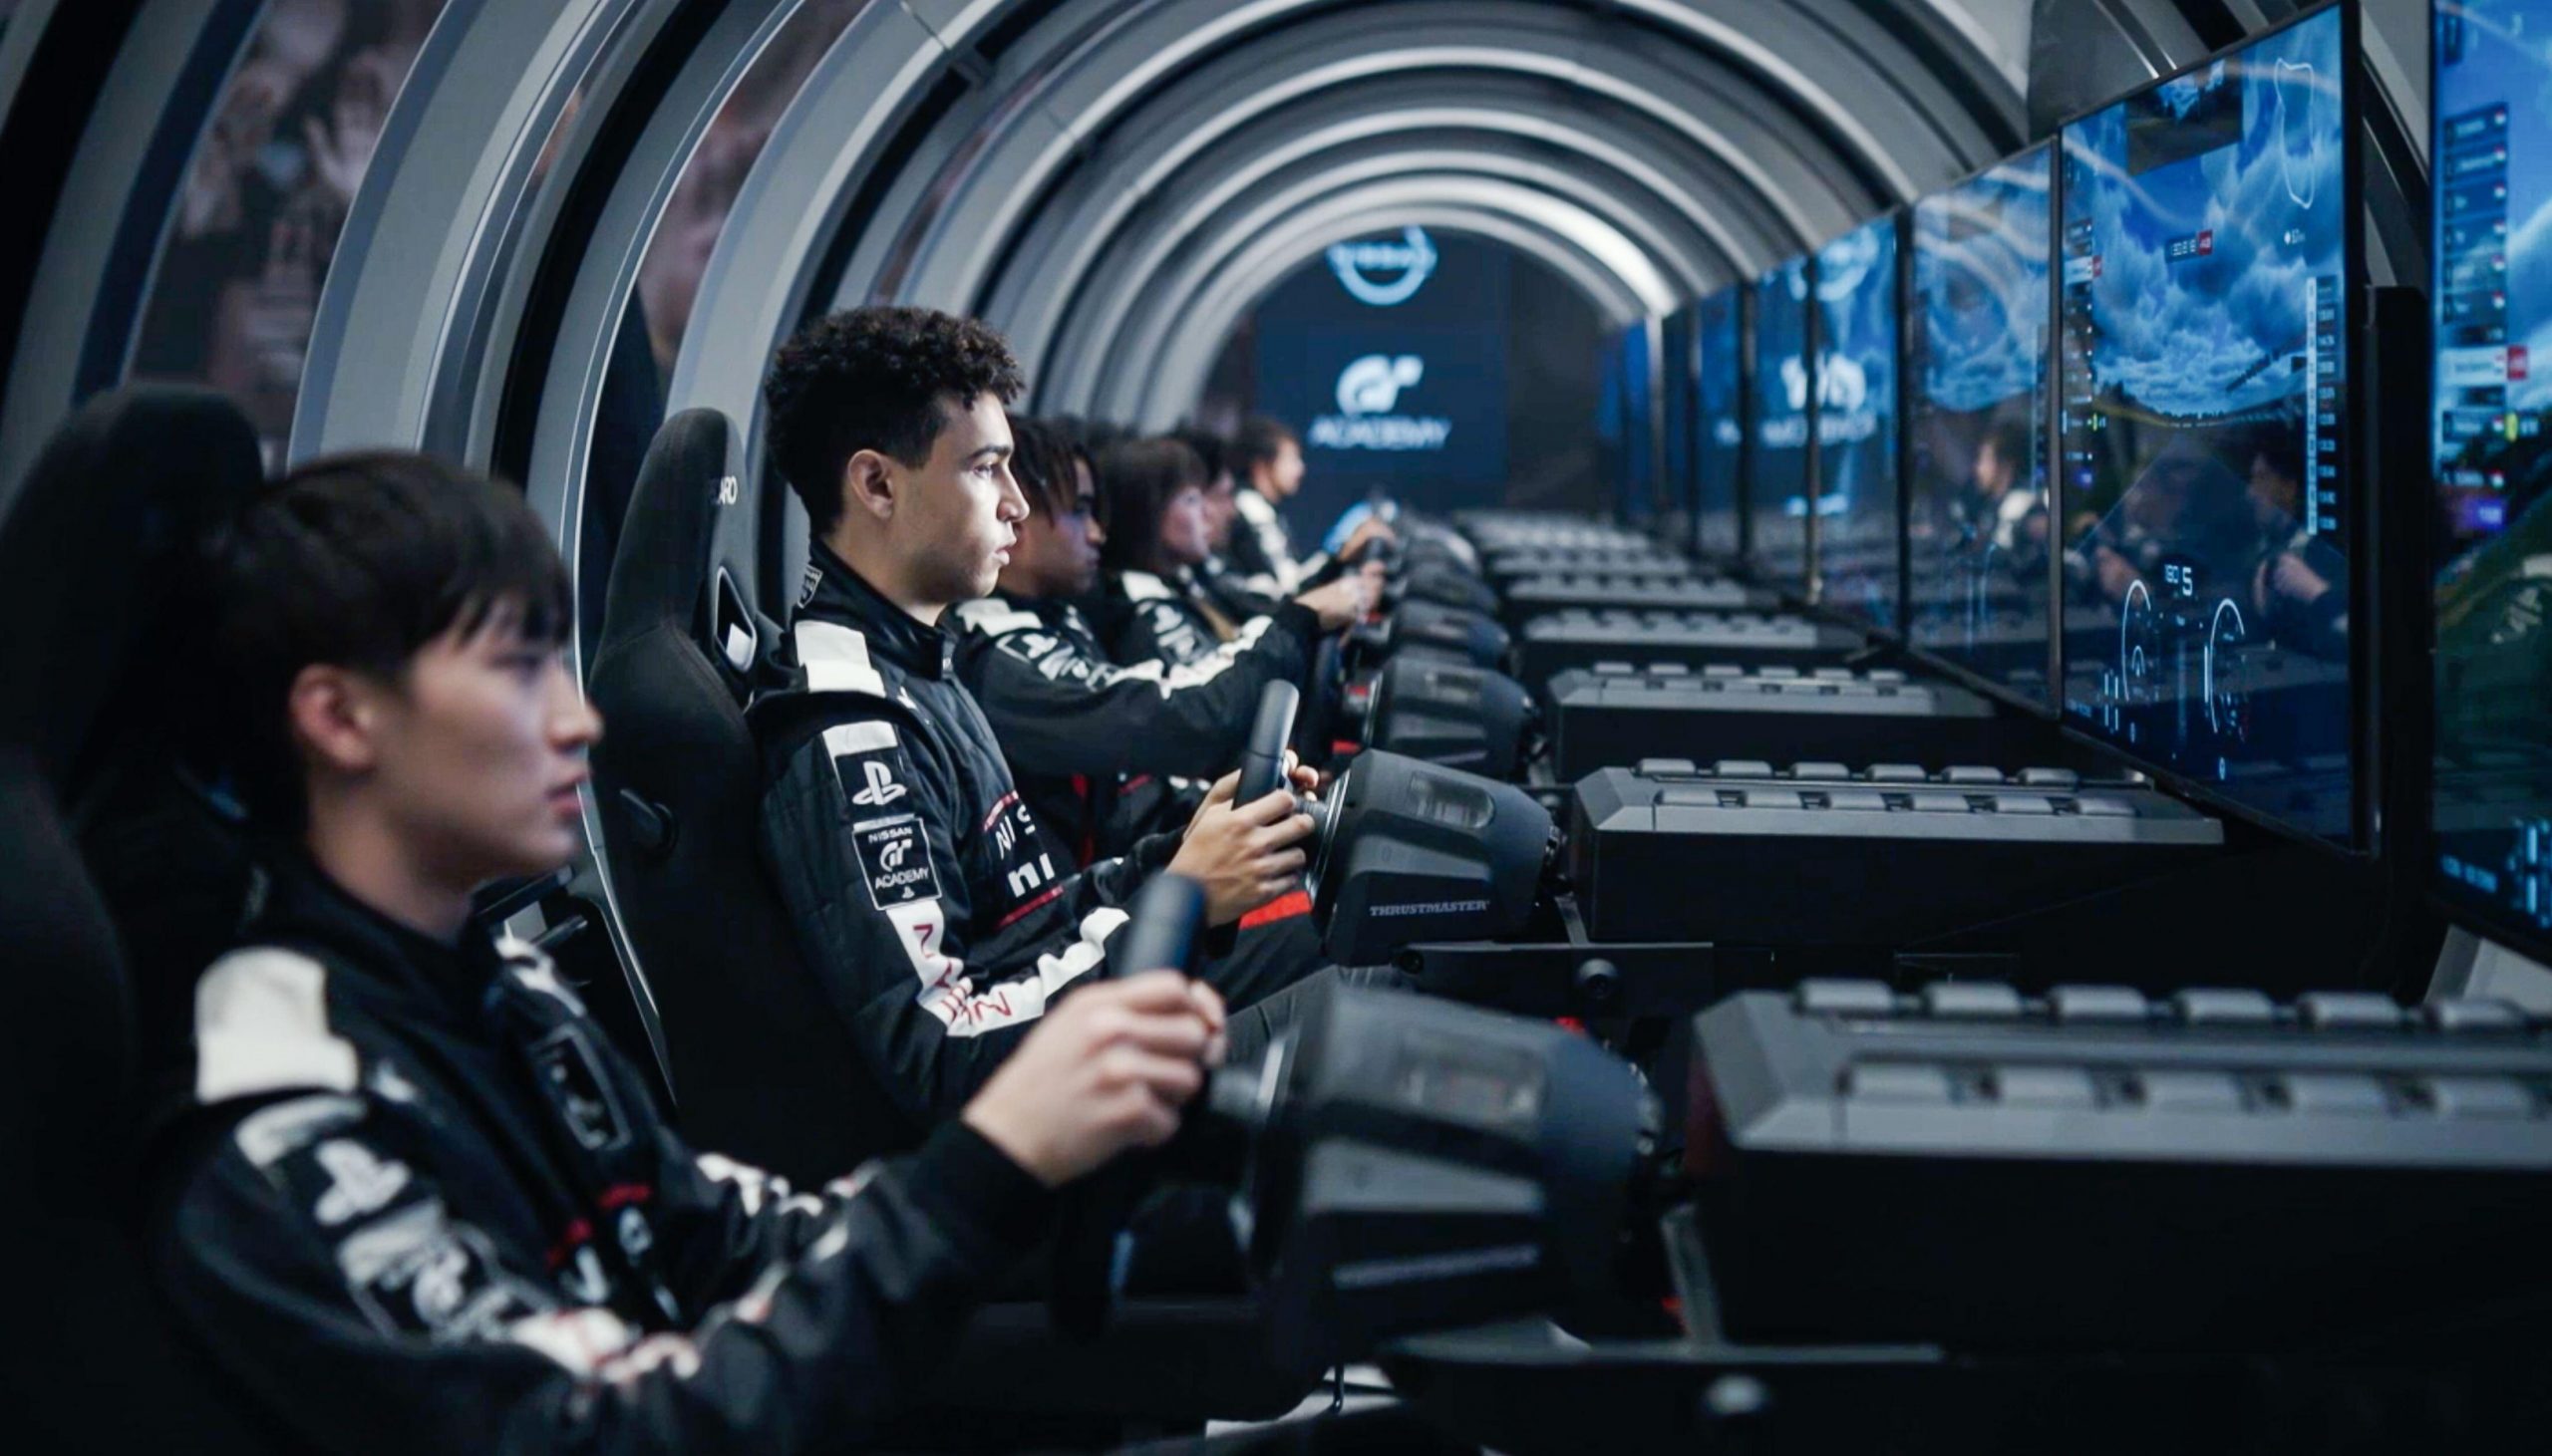 Gran Turismo review: Racing drama delivers edge-of-your seat on-track entertainment